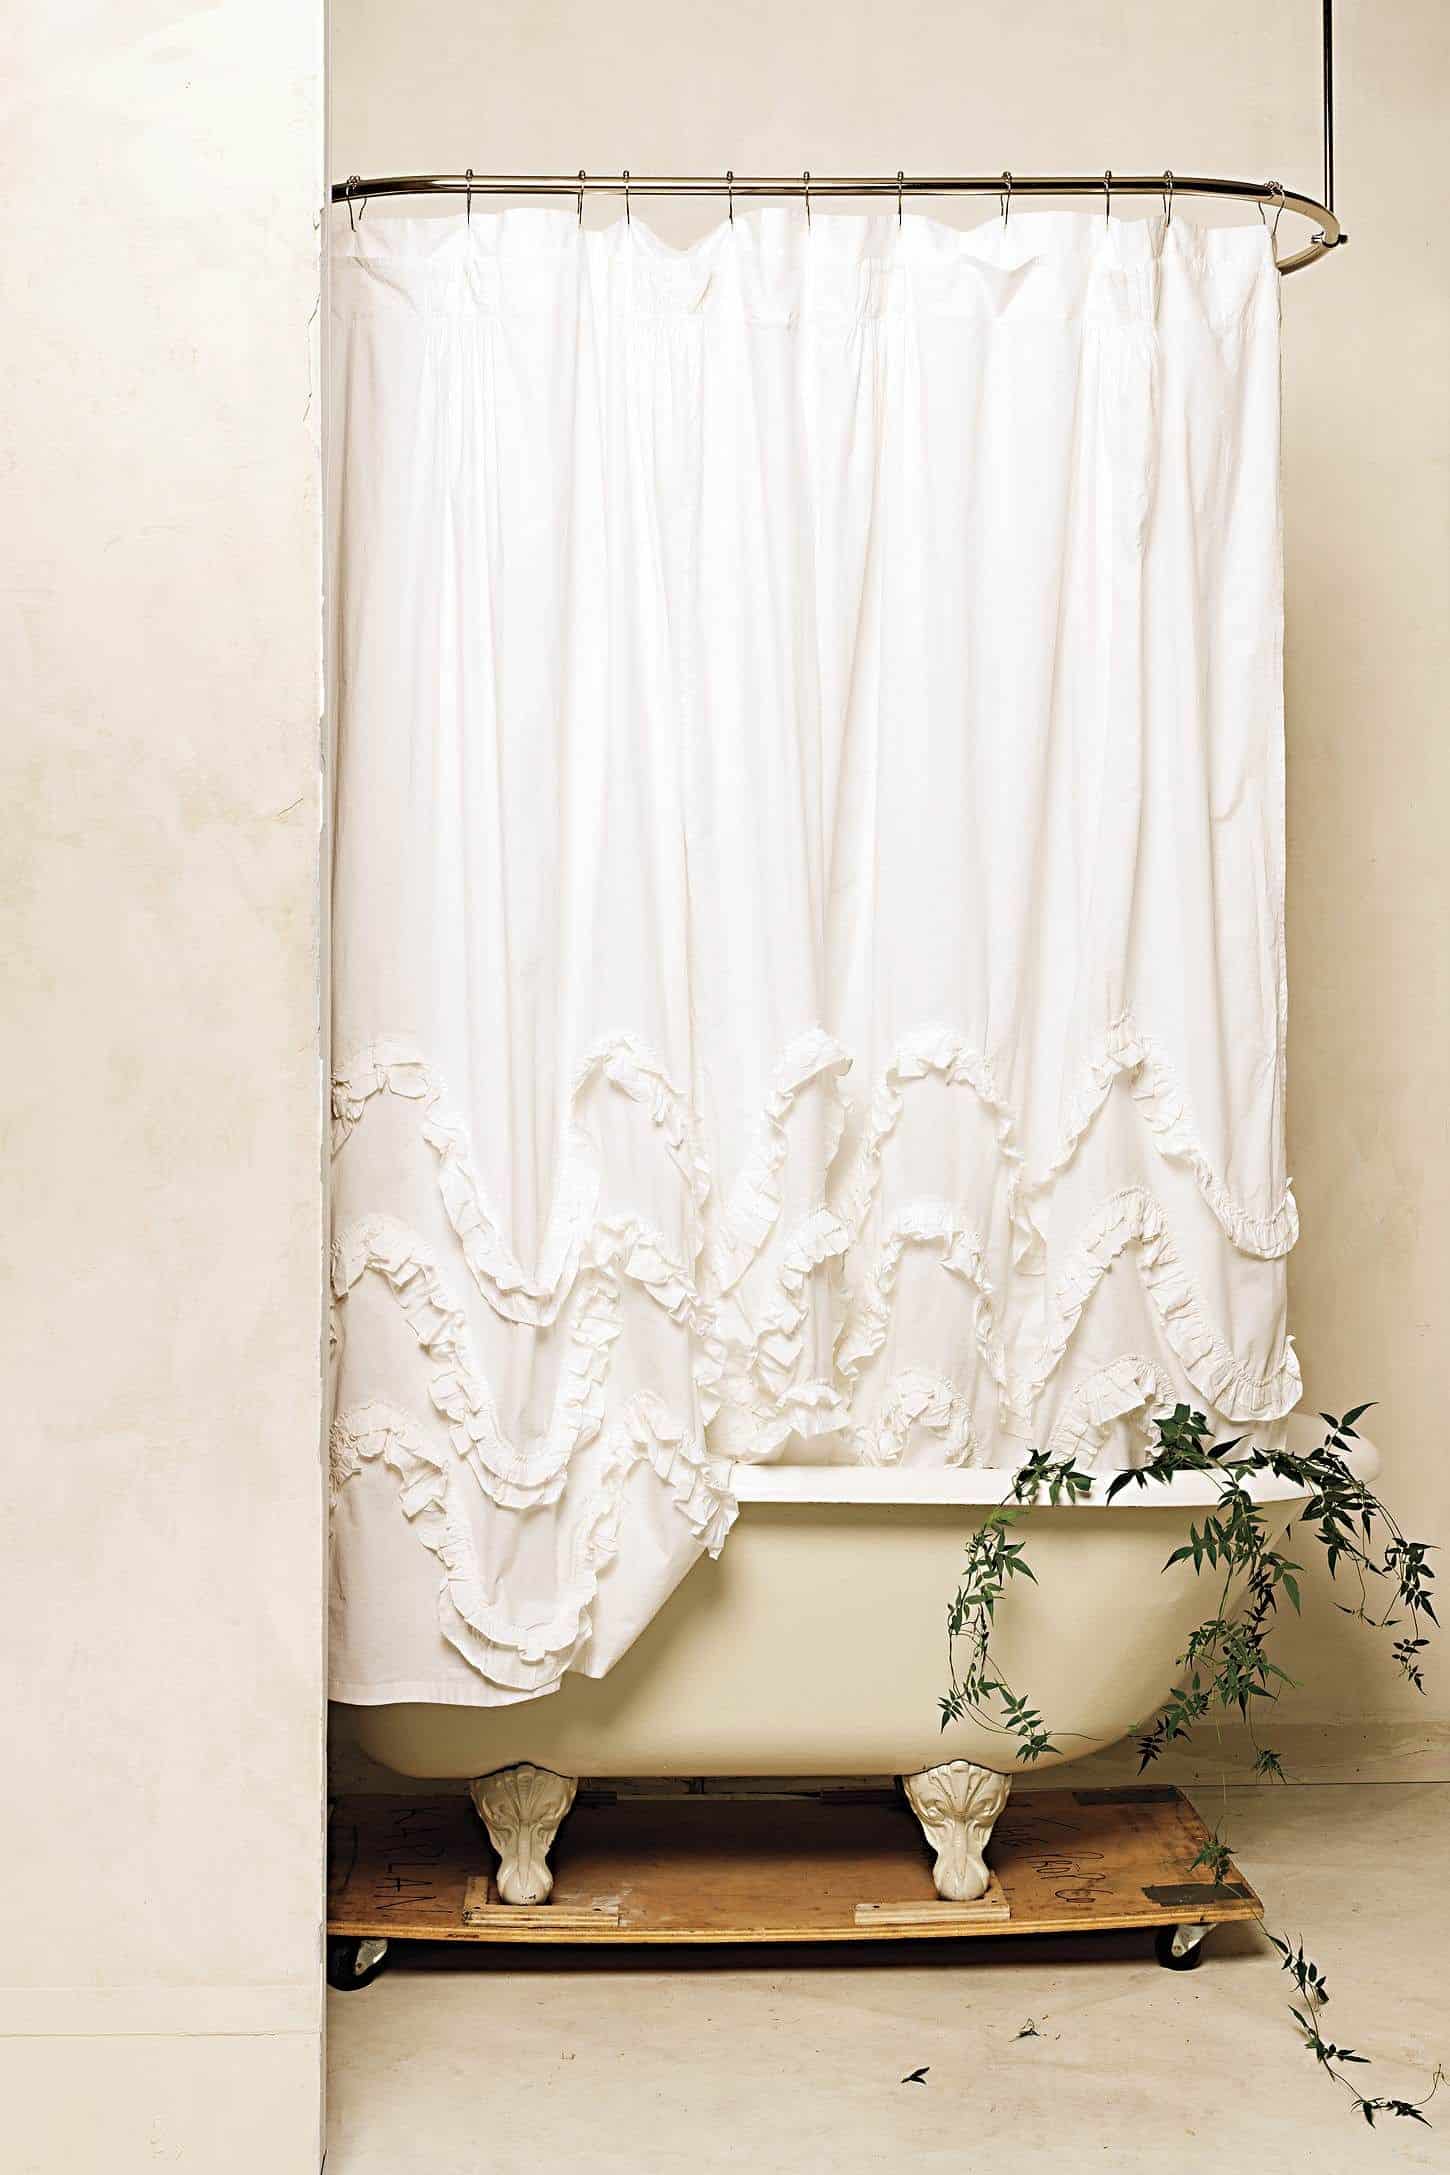 And Easy Diy Shower Curtain Ideas, Shower Curtains That Split Down The Middle